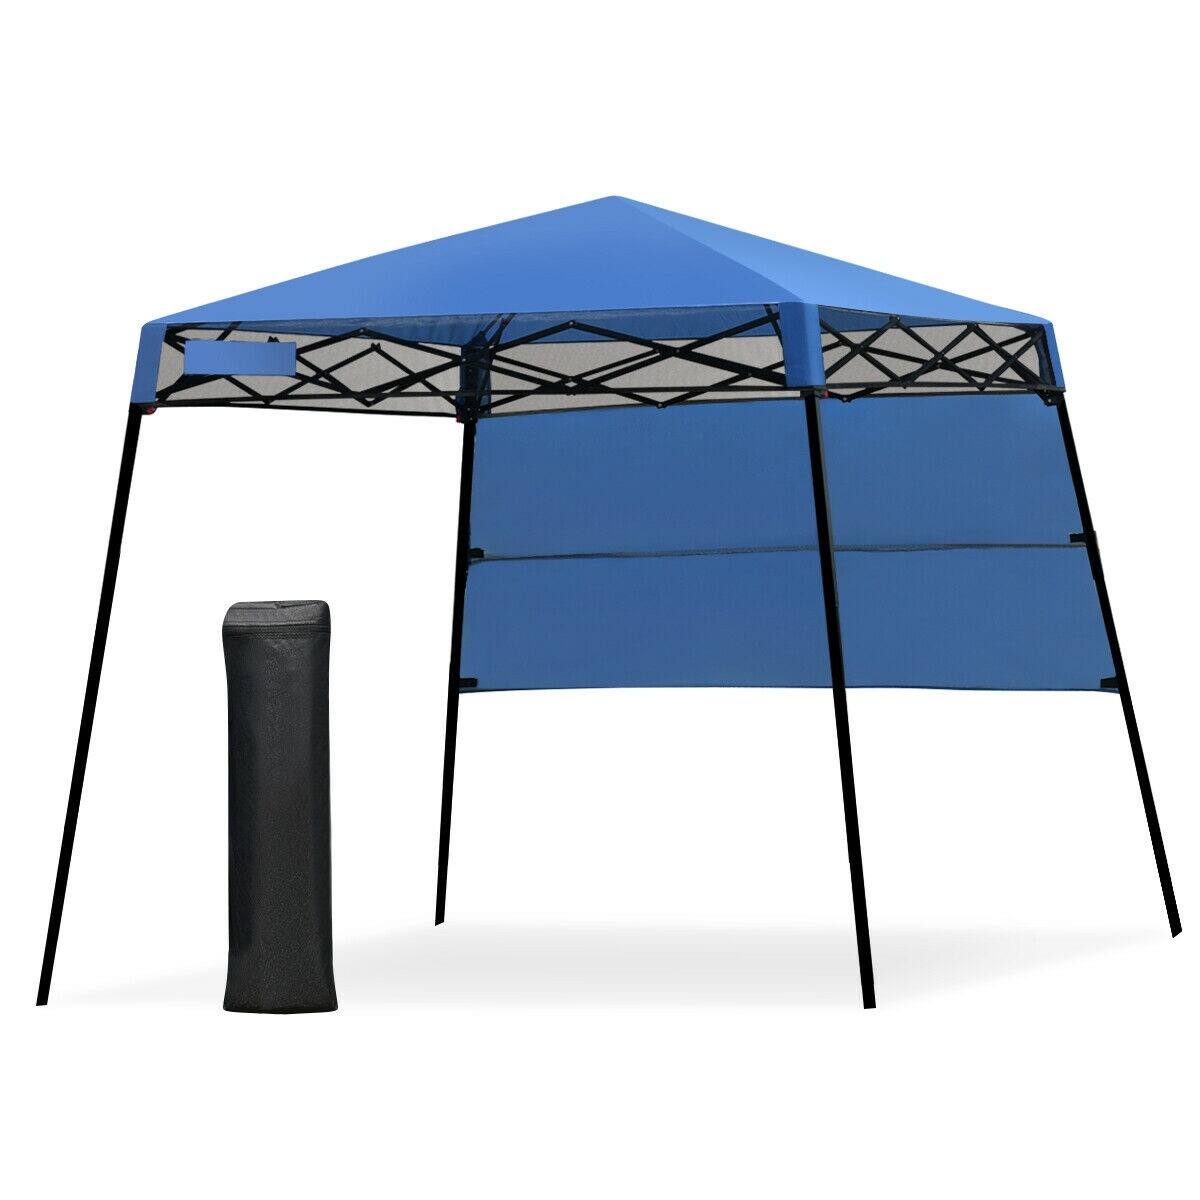 Costway 7 x 7 FT Sland Adjustable Portable Canopy Tent w/ Backpack - $58.95 + Free Shipping